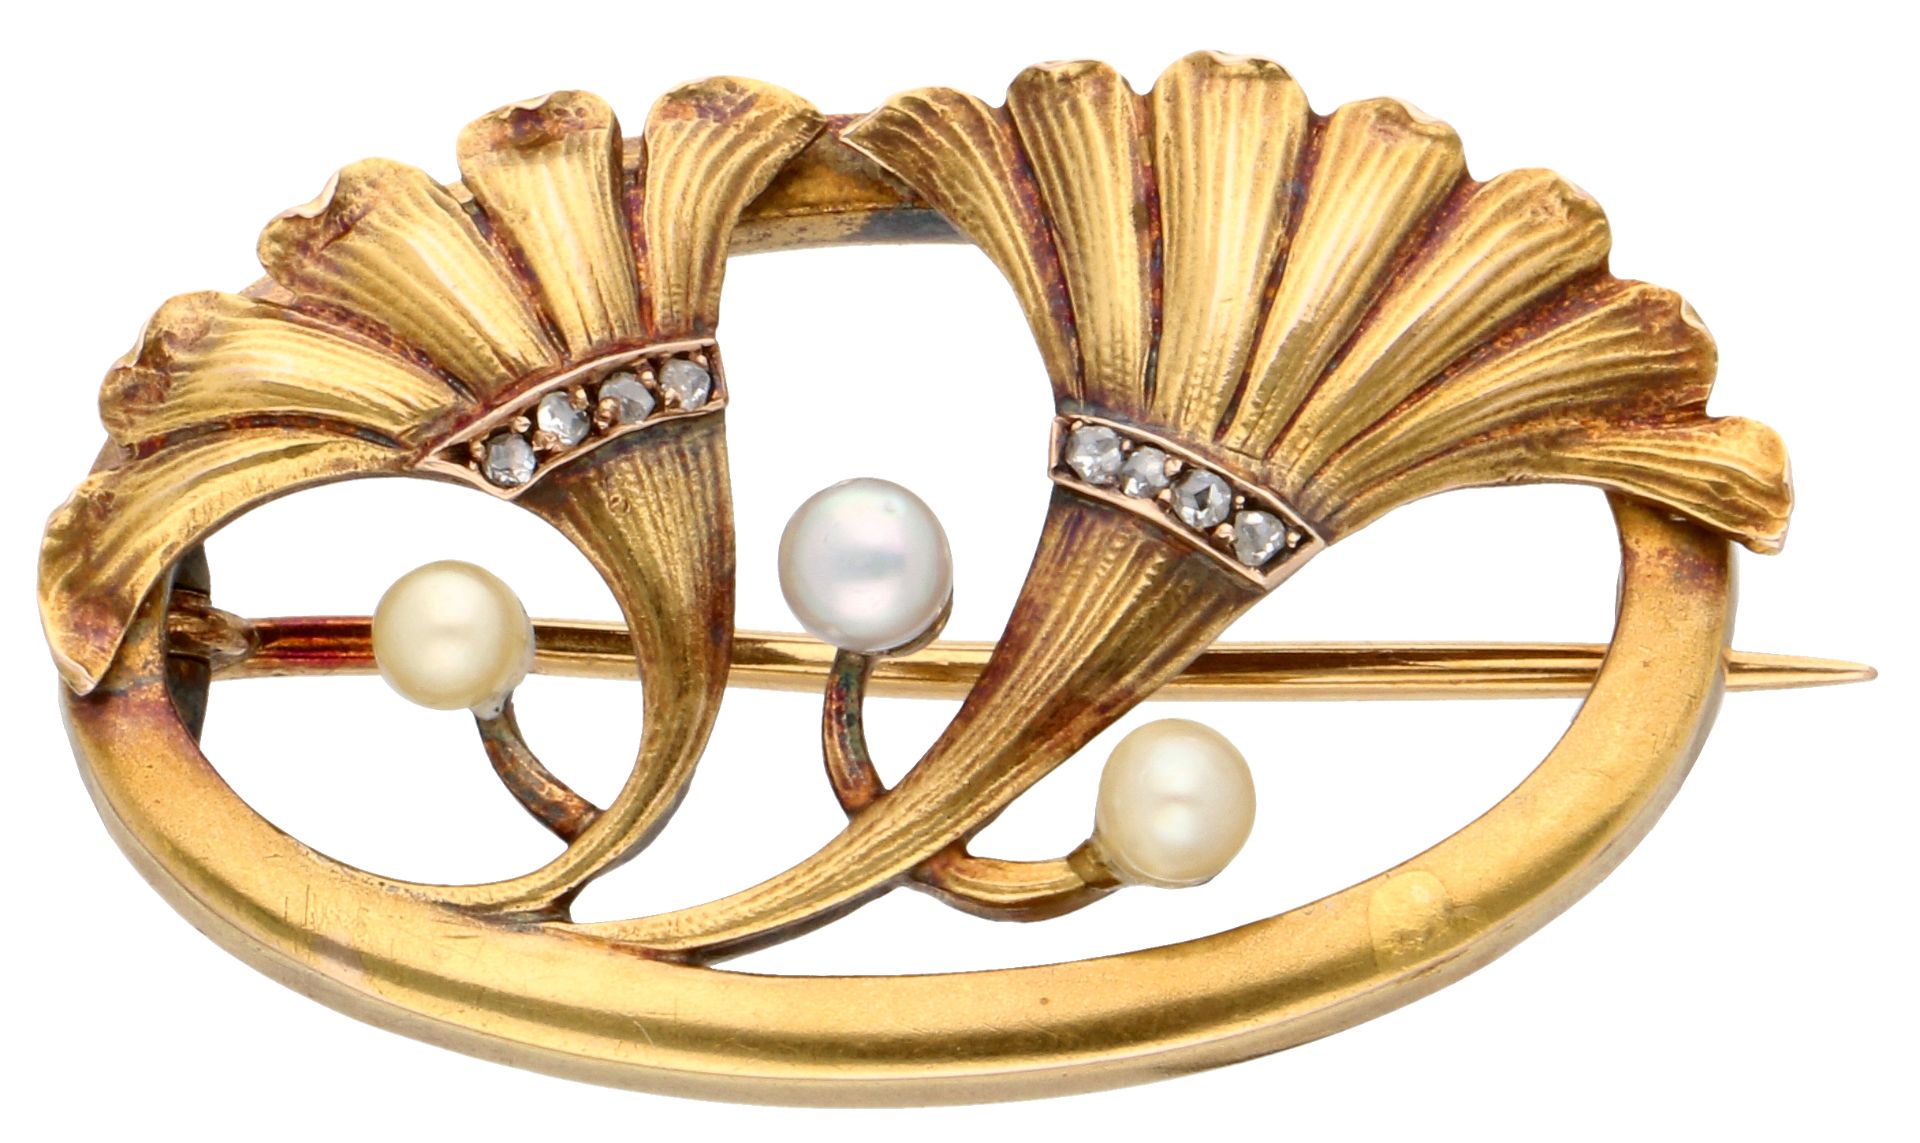 No Reserve - 18K Yellow old Art Nouveau brooch set with cultivé pearls and rose cut diamonds.